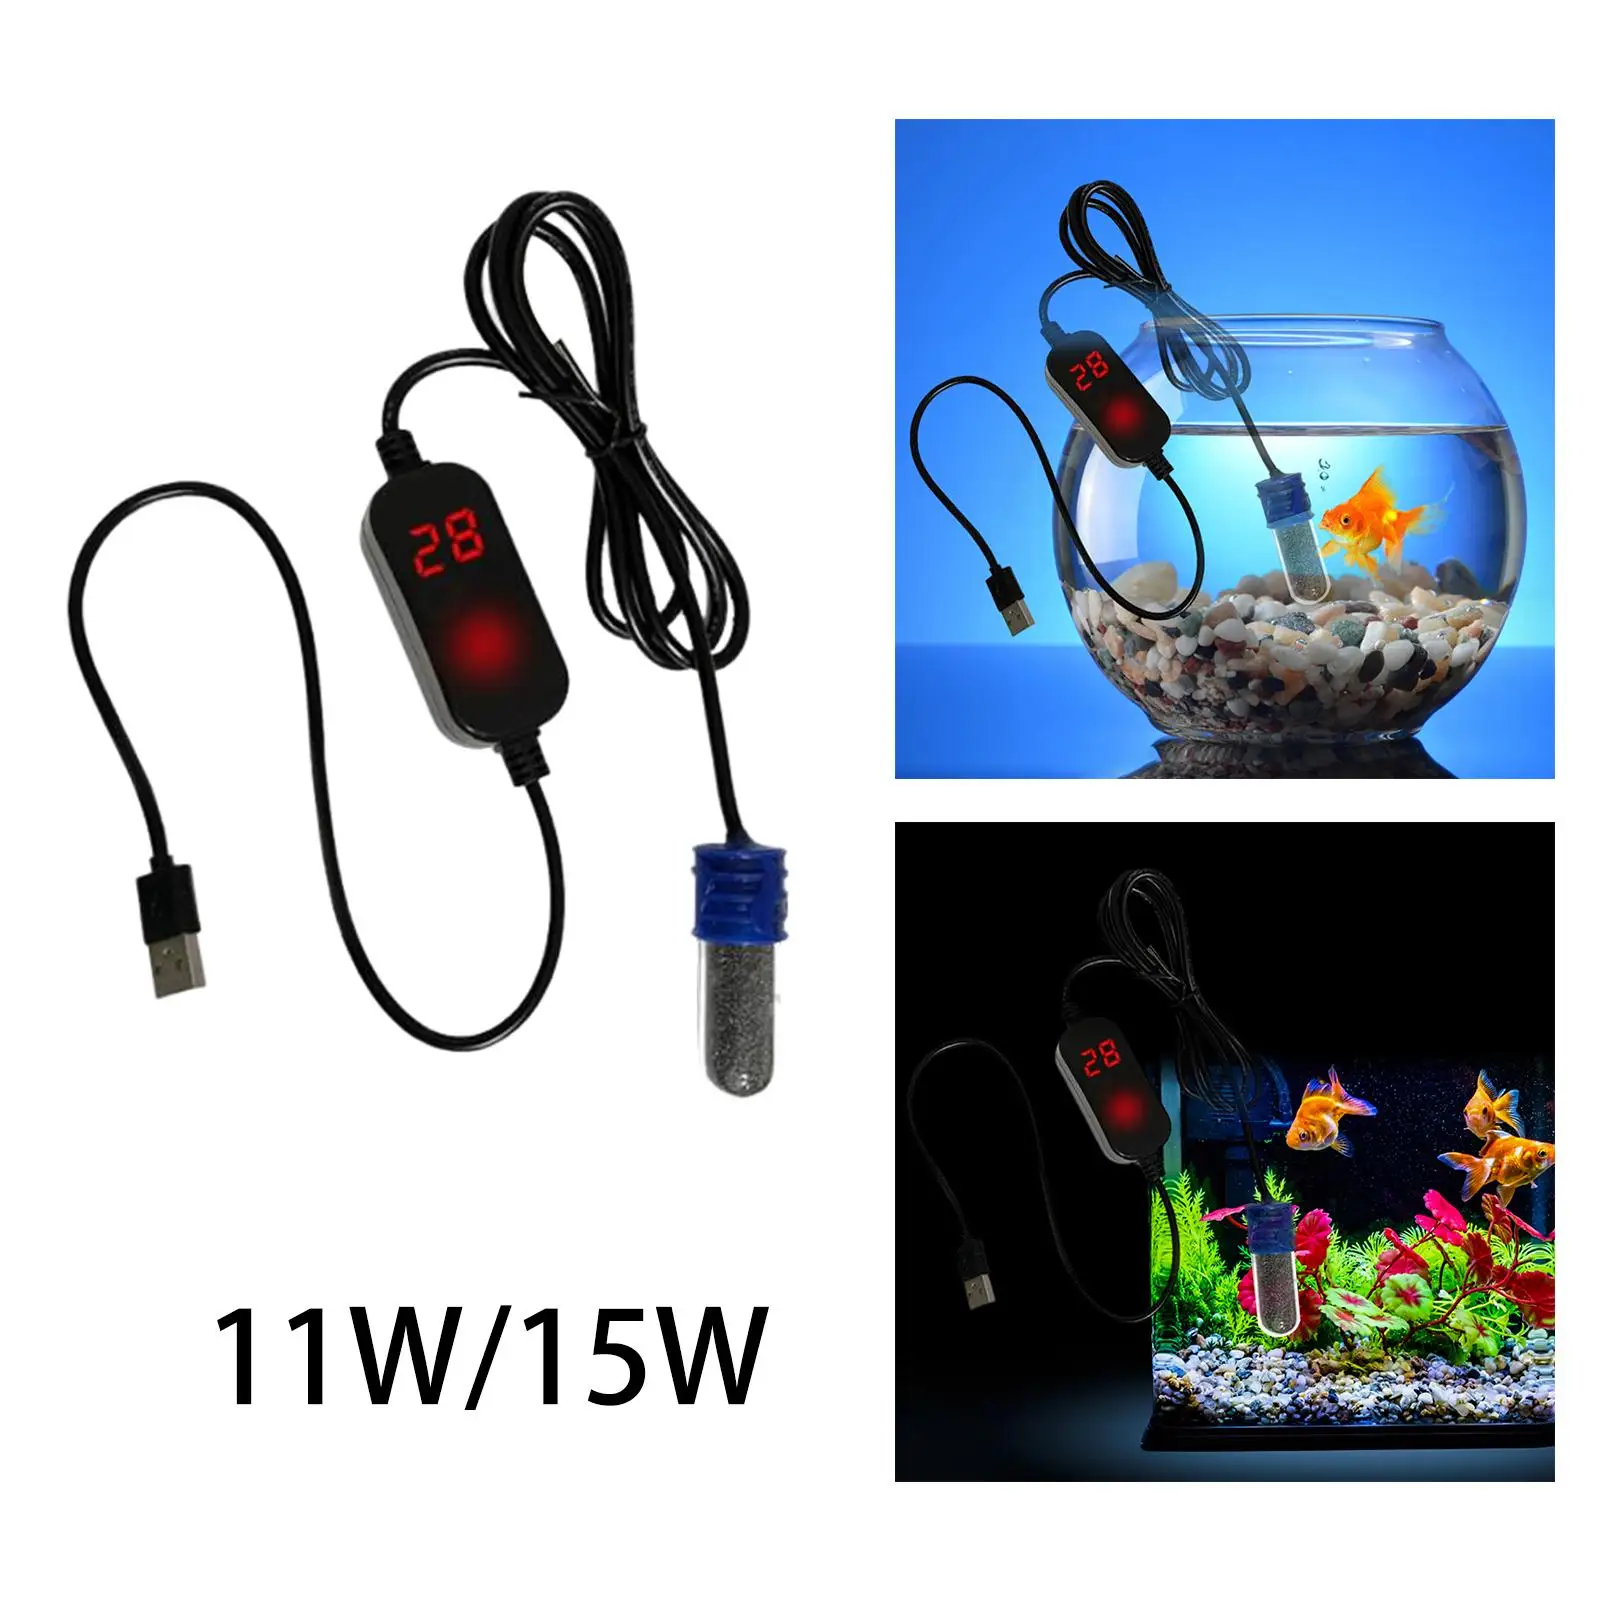 Submersible Aquarium Heater Temperature Adjustable Heating Rod LED Display for 1 Gallon Small Fish Tank Heater for Horned Frogs